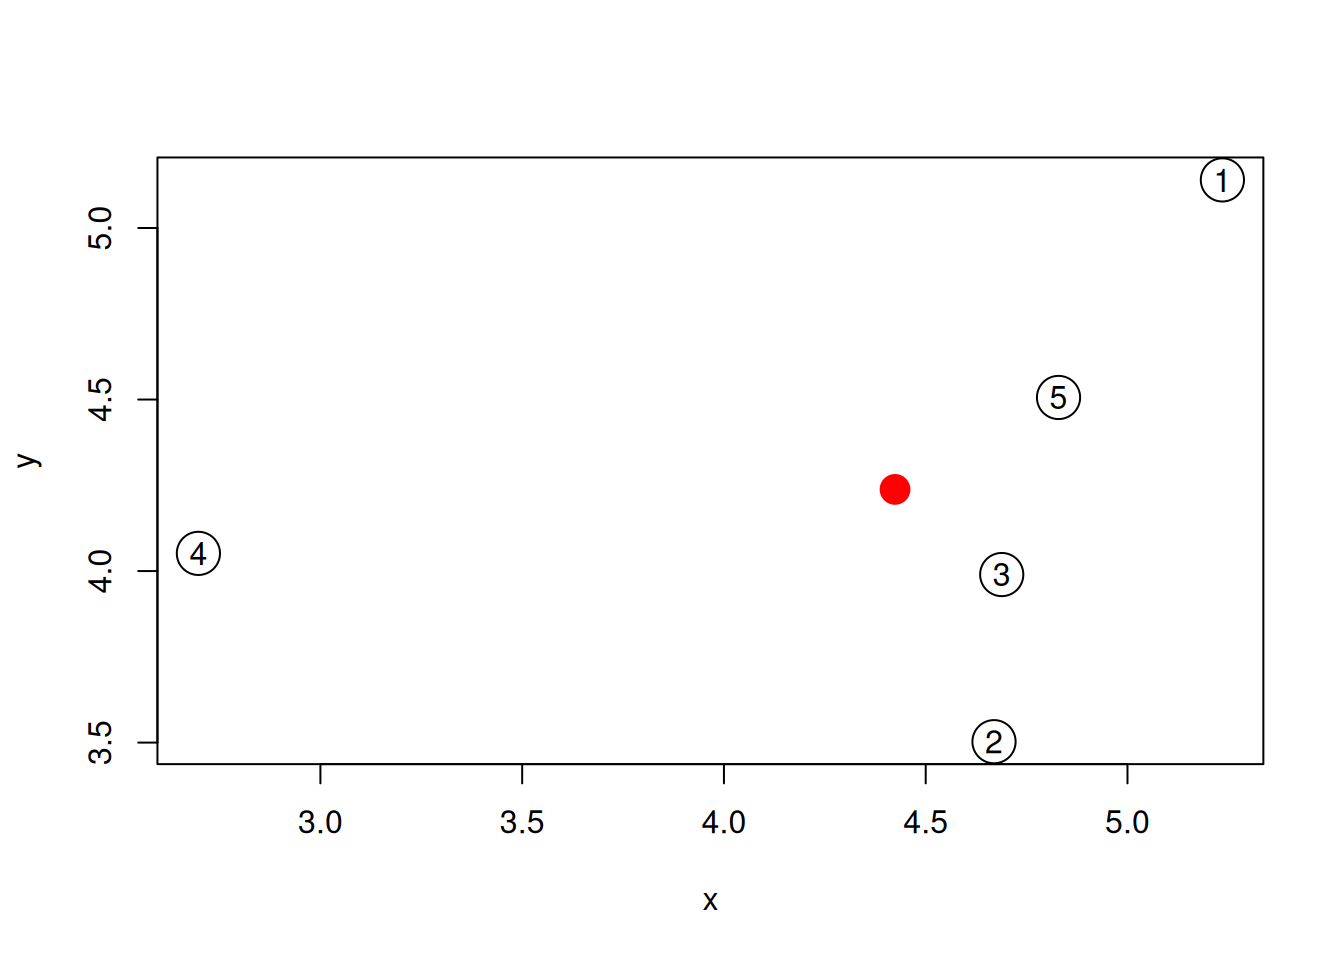 Visualisation of the average sample, in red.